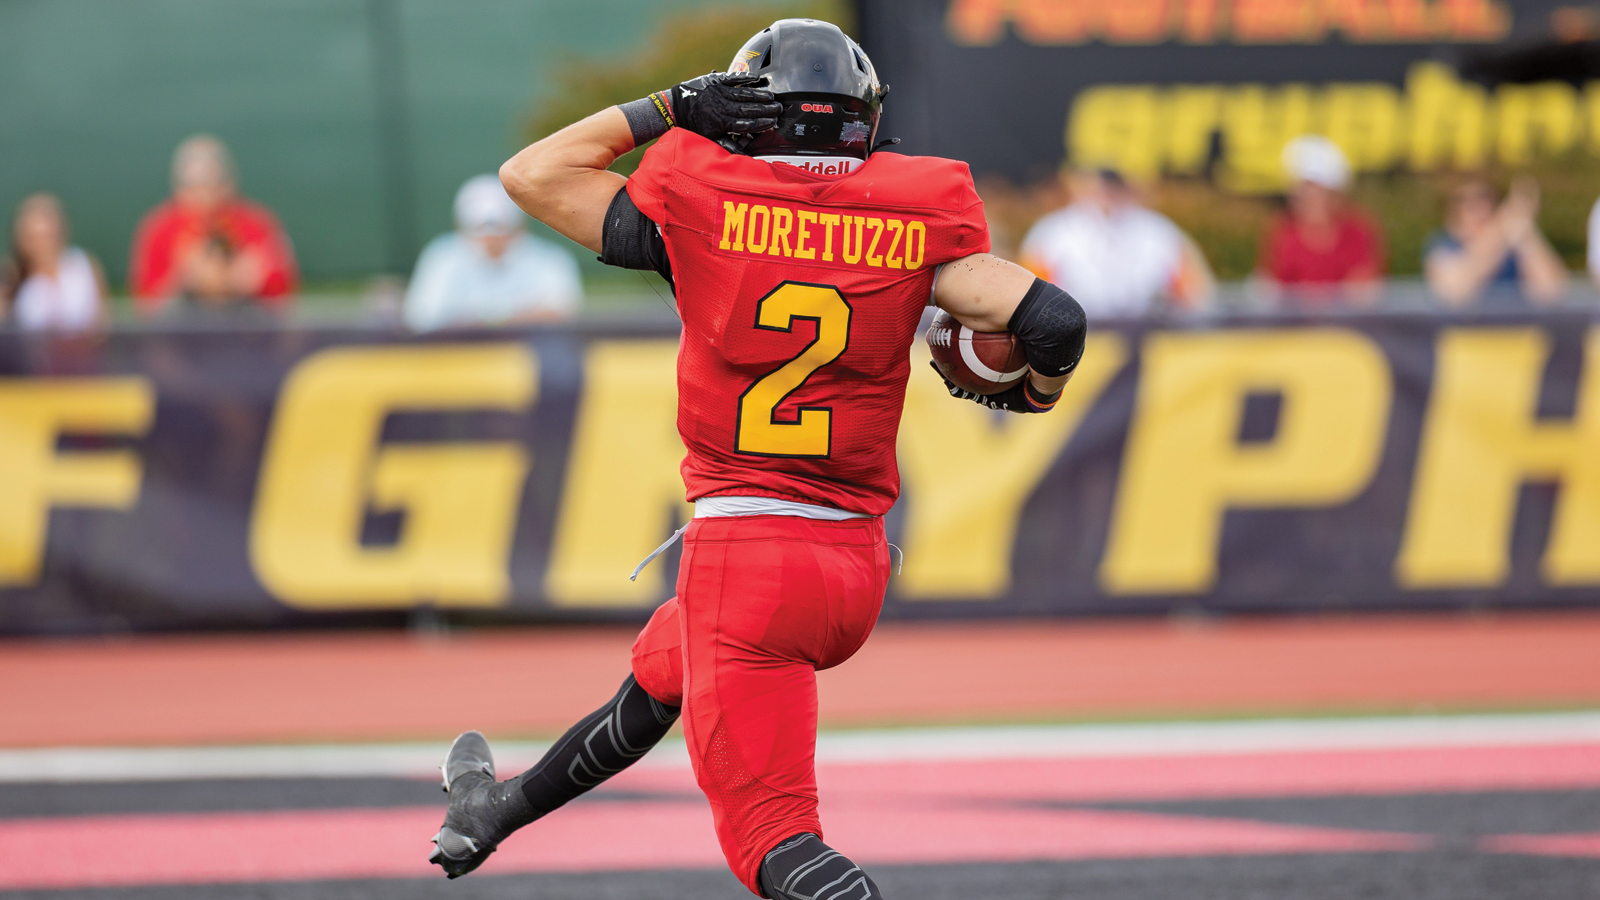 Guelph's Anthony Moretuzzo about the run into the end zone